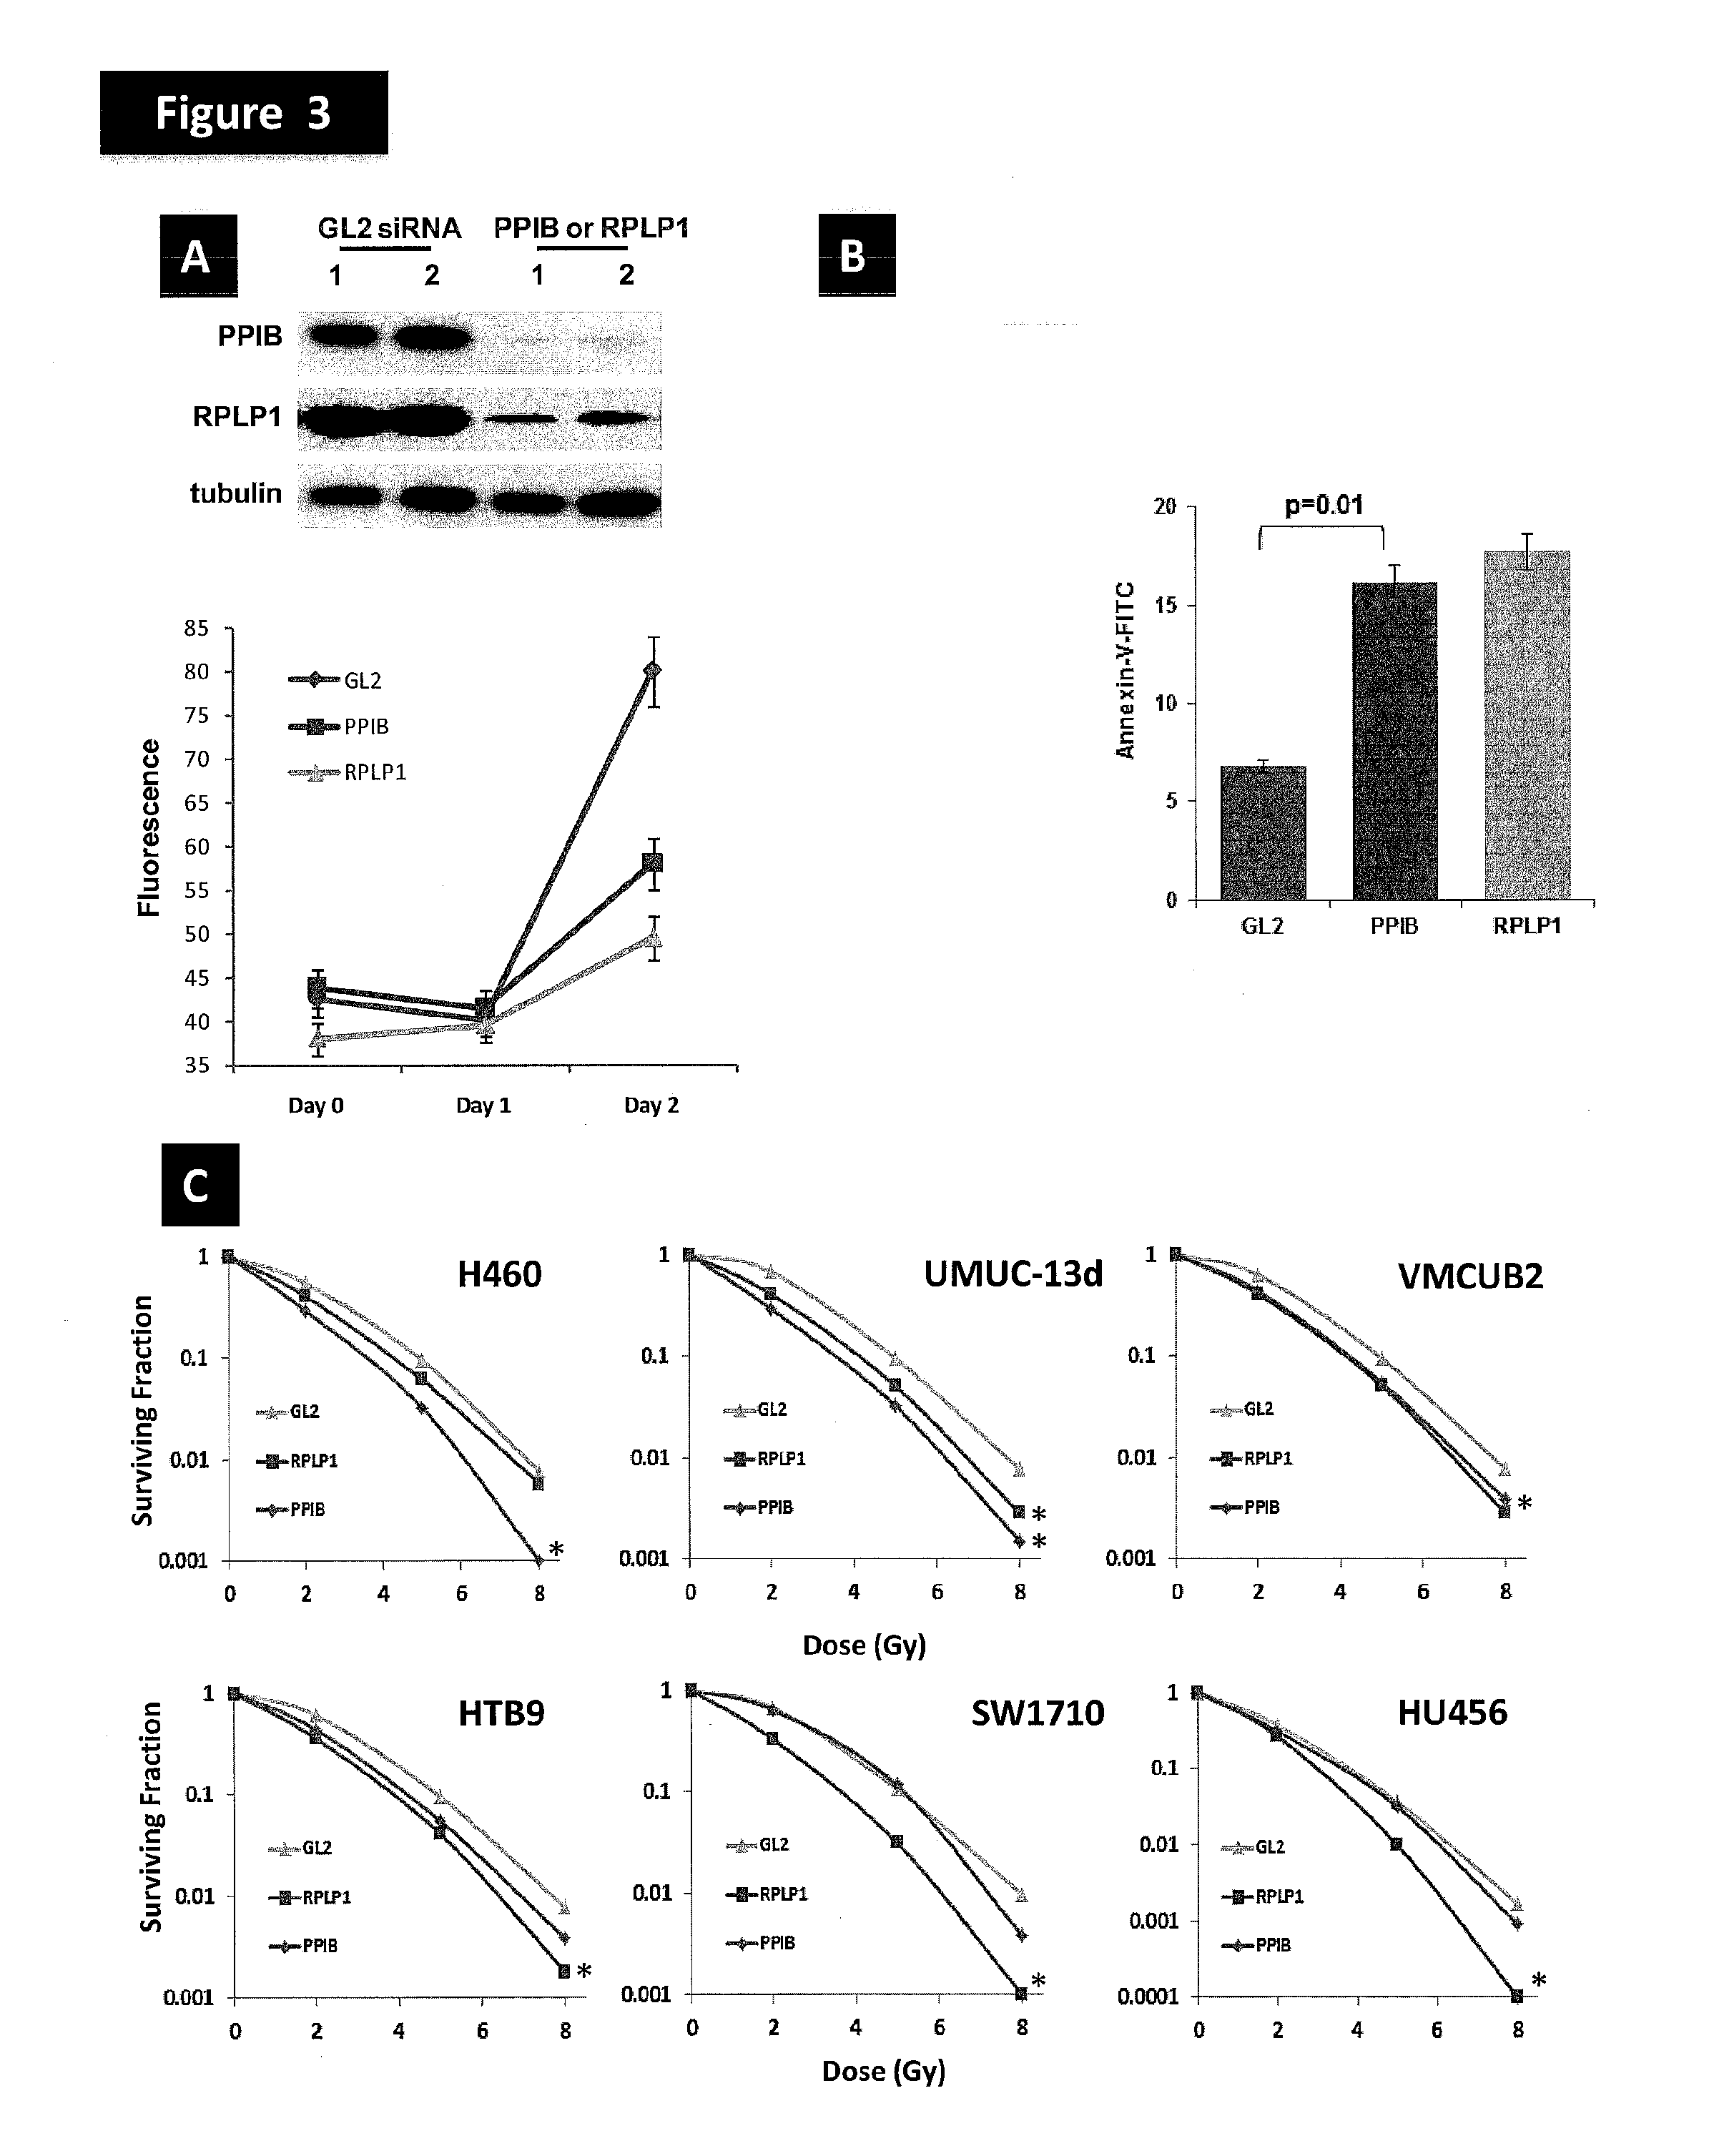 Methods for prediction of clinical response to radiation therapy in cancer patients